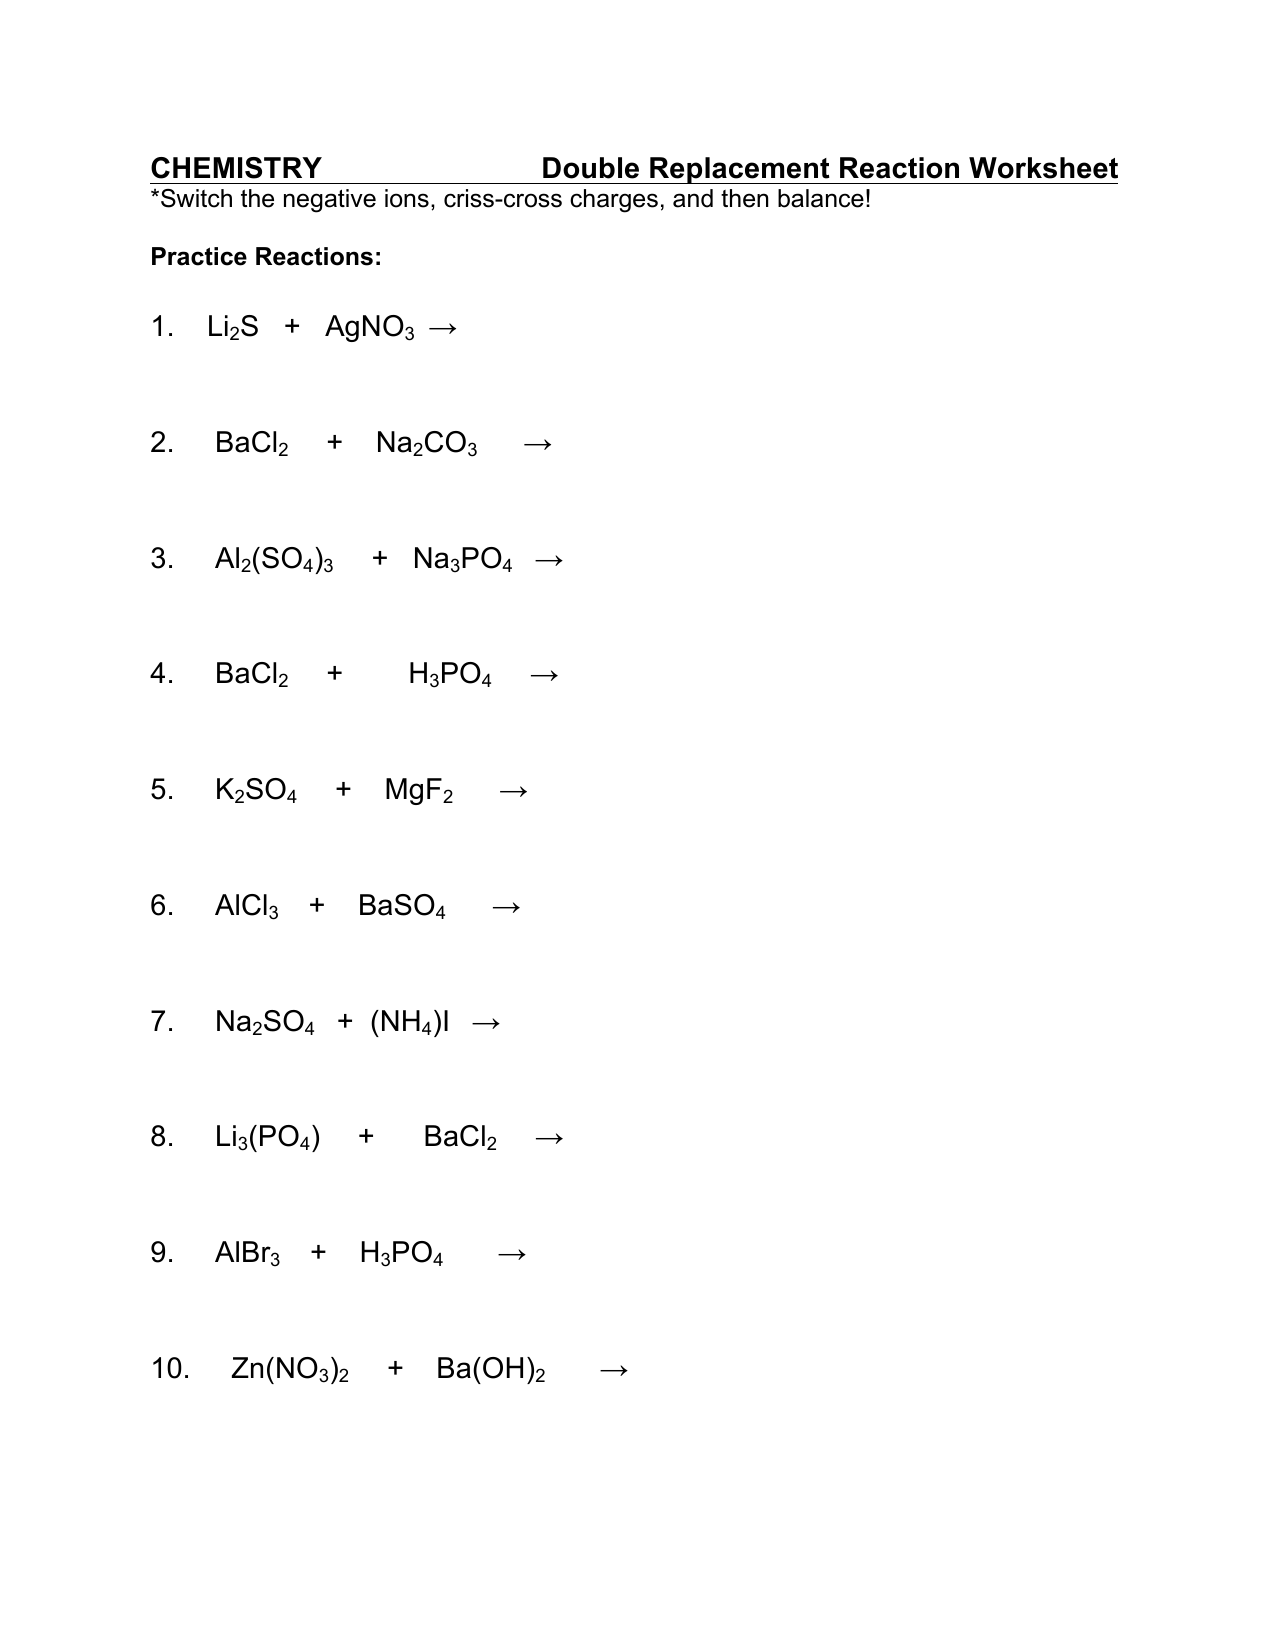 Double Replacement Rxn Worksheet Within Double Replacement Reaction Worksheet